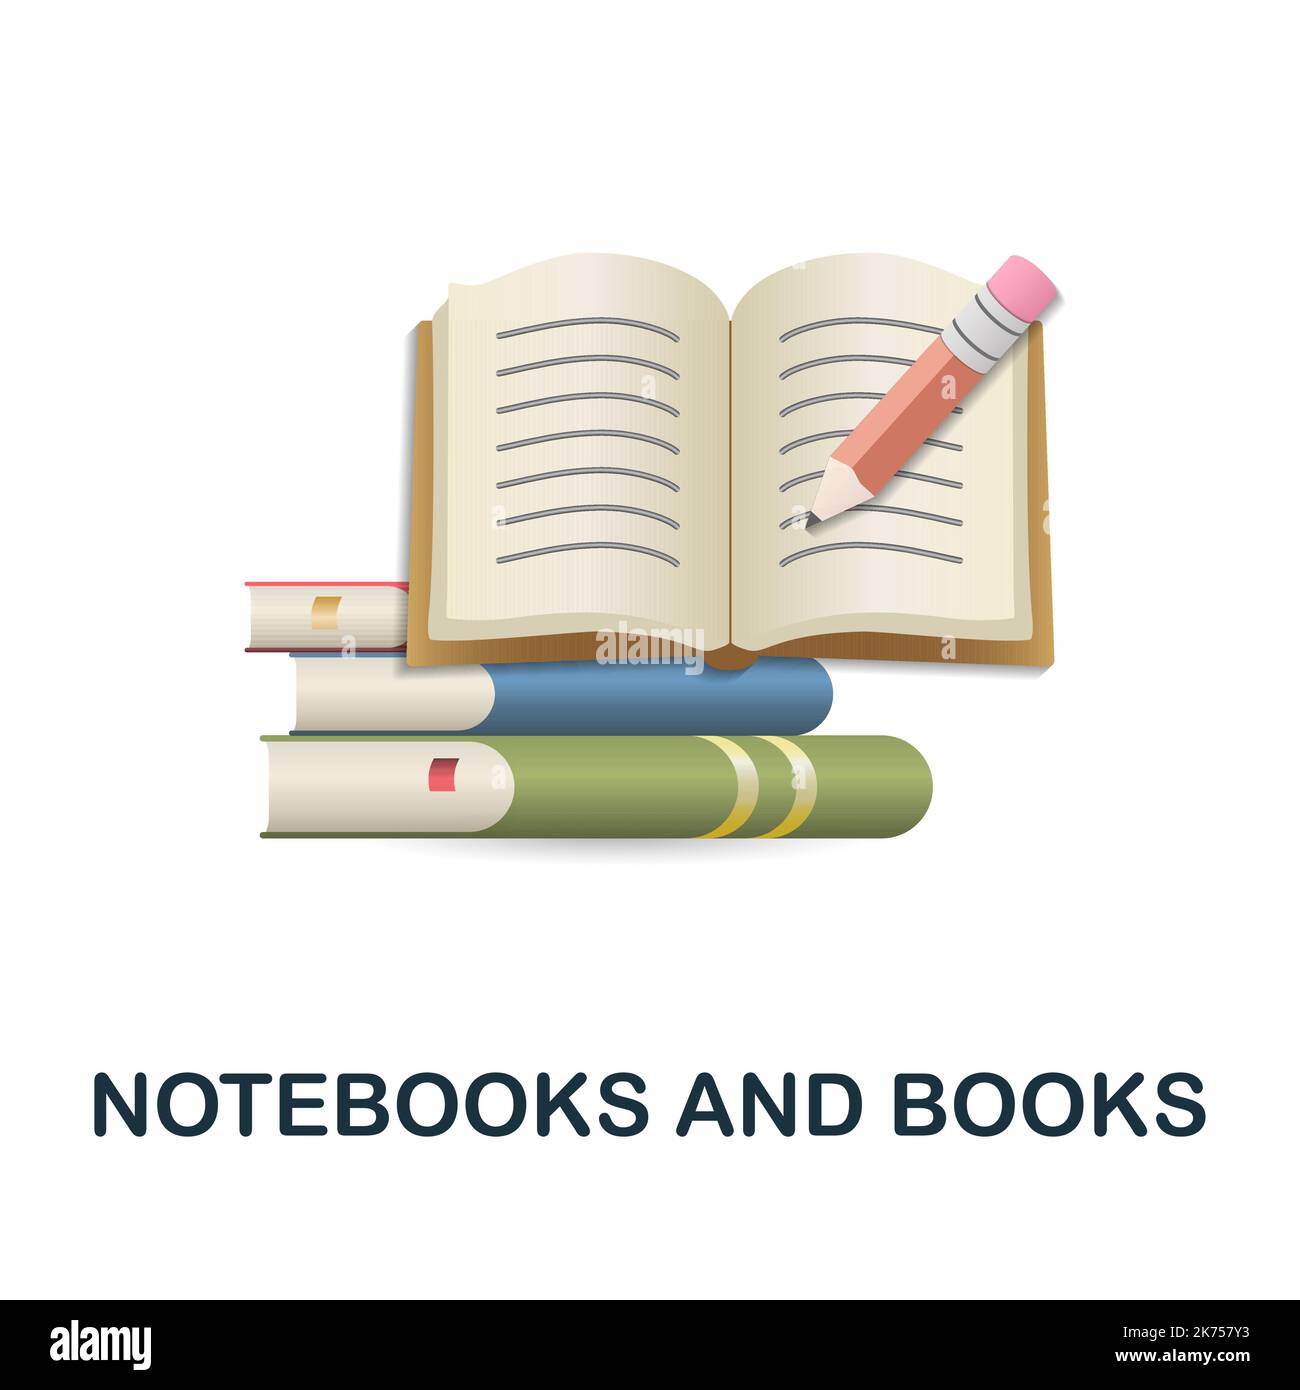 https://c8.alamy.com/comp/2K757Y3/notebooks-and-books-icon-3d-illustration-from-back-to-school-collection-creative-notebooks-and-books-3d-icon-for-web-design-templates-infographics-2K757Y3.jpg